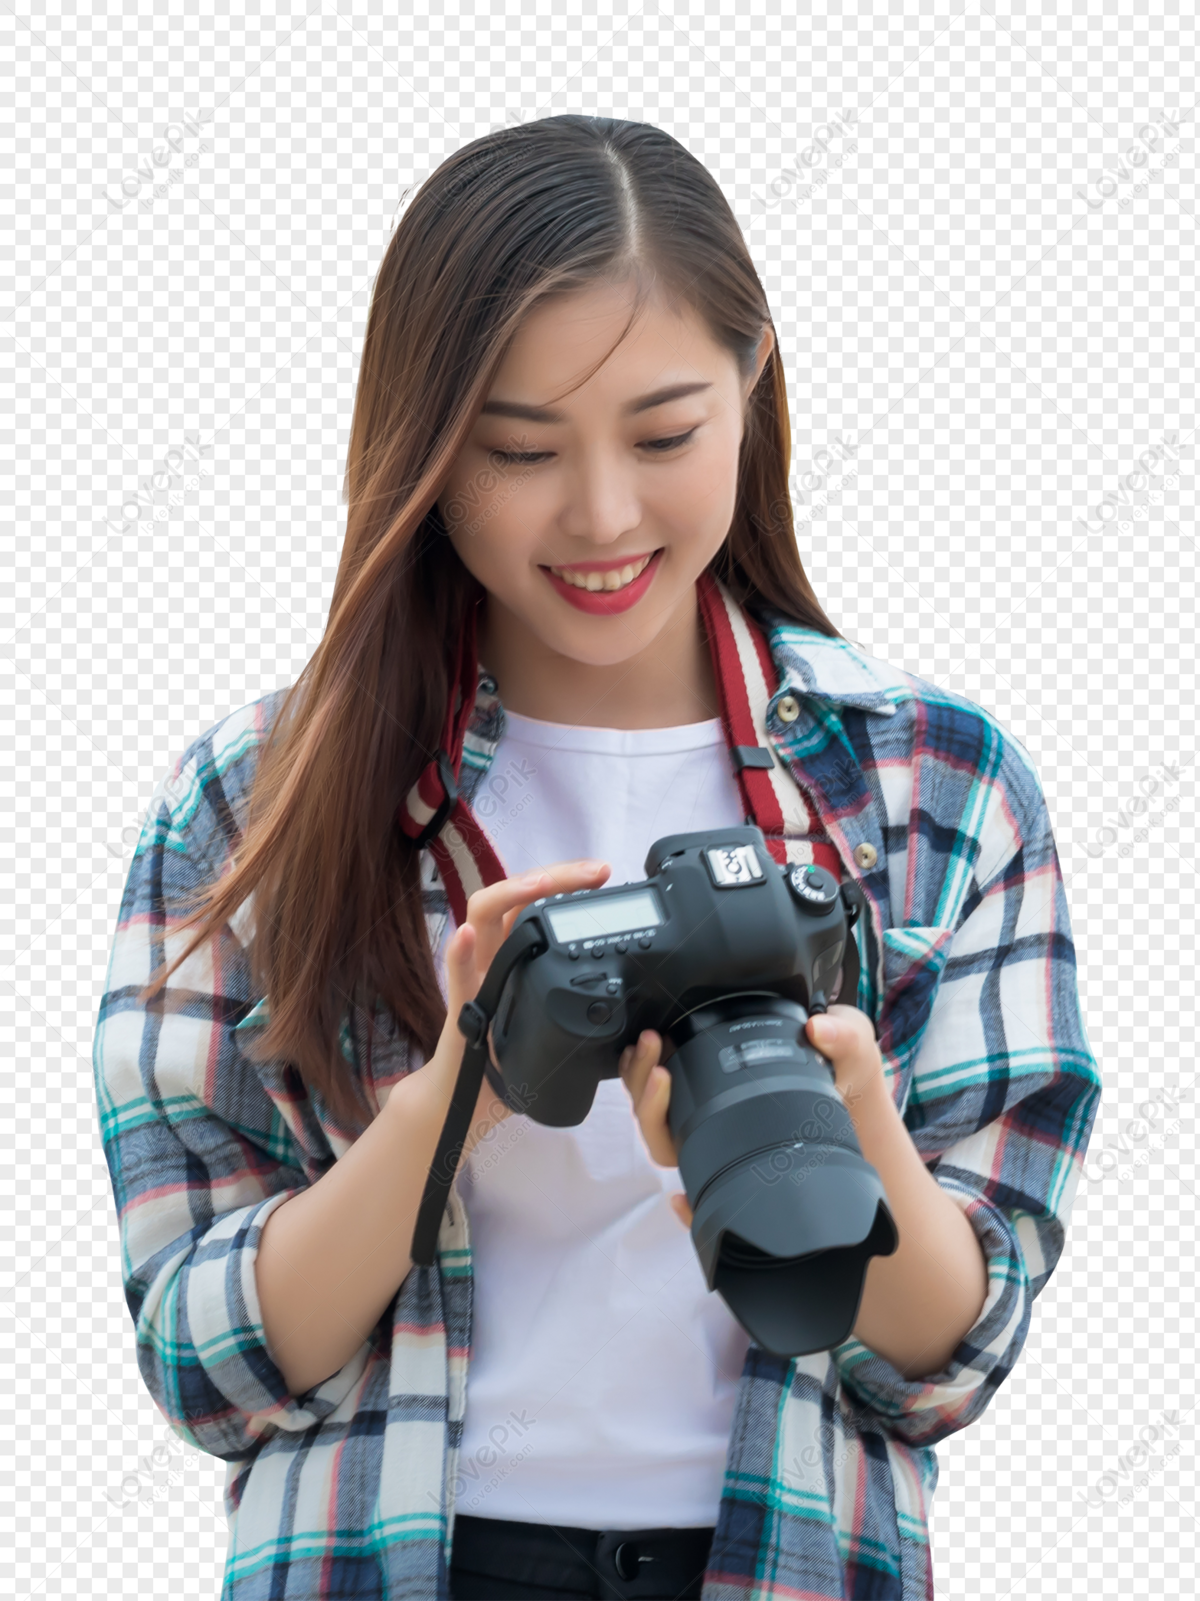 City Travel Girl Camera PNG Image Free Download And Clipart Image For Free  Download - Lovepik | 400828591